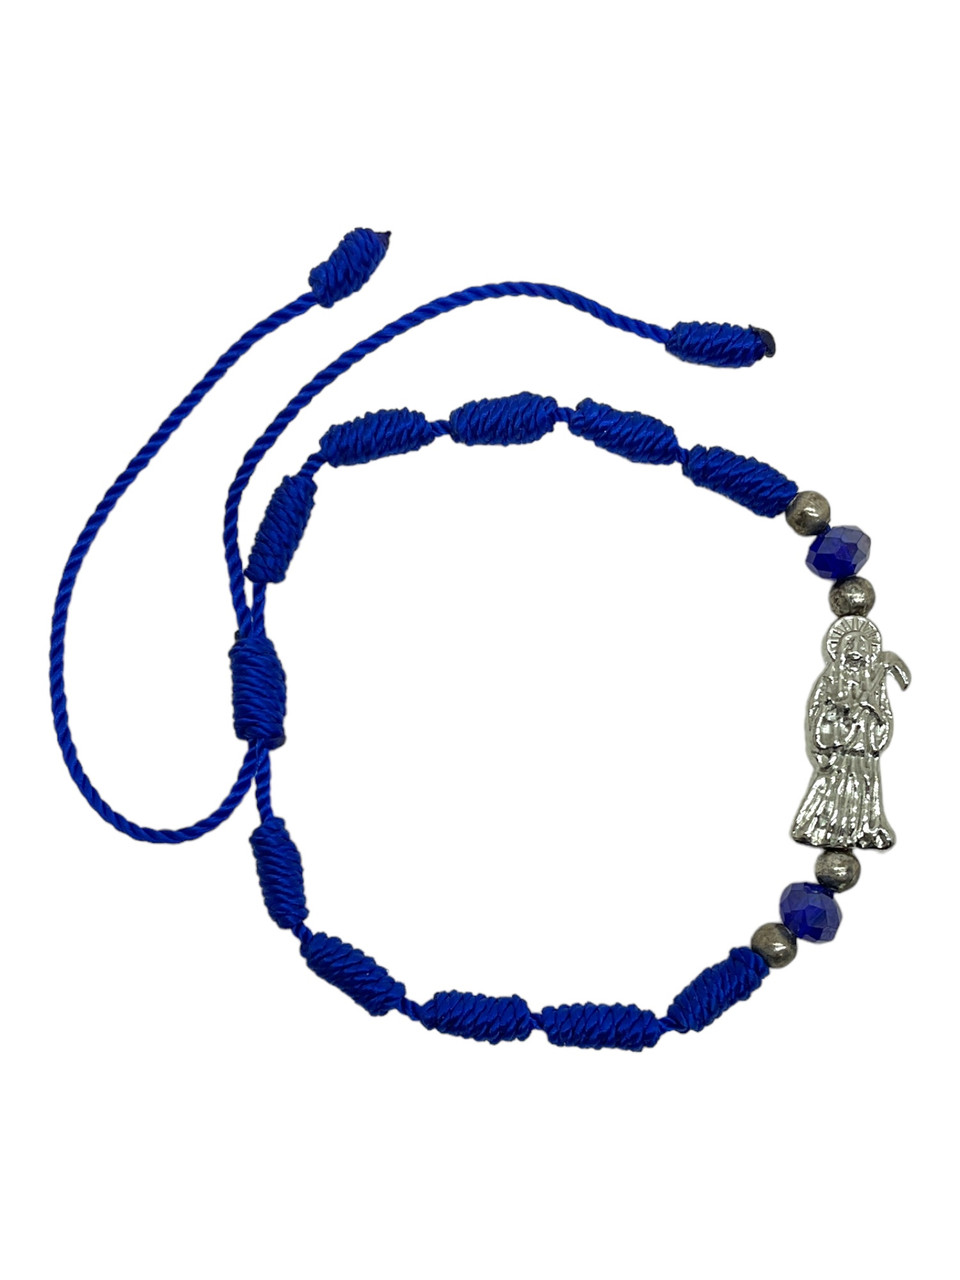 DIY Rosary Making Kit Blues includes: Twine, Knotting Tool, and